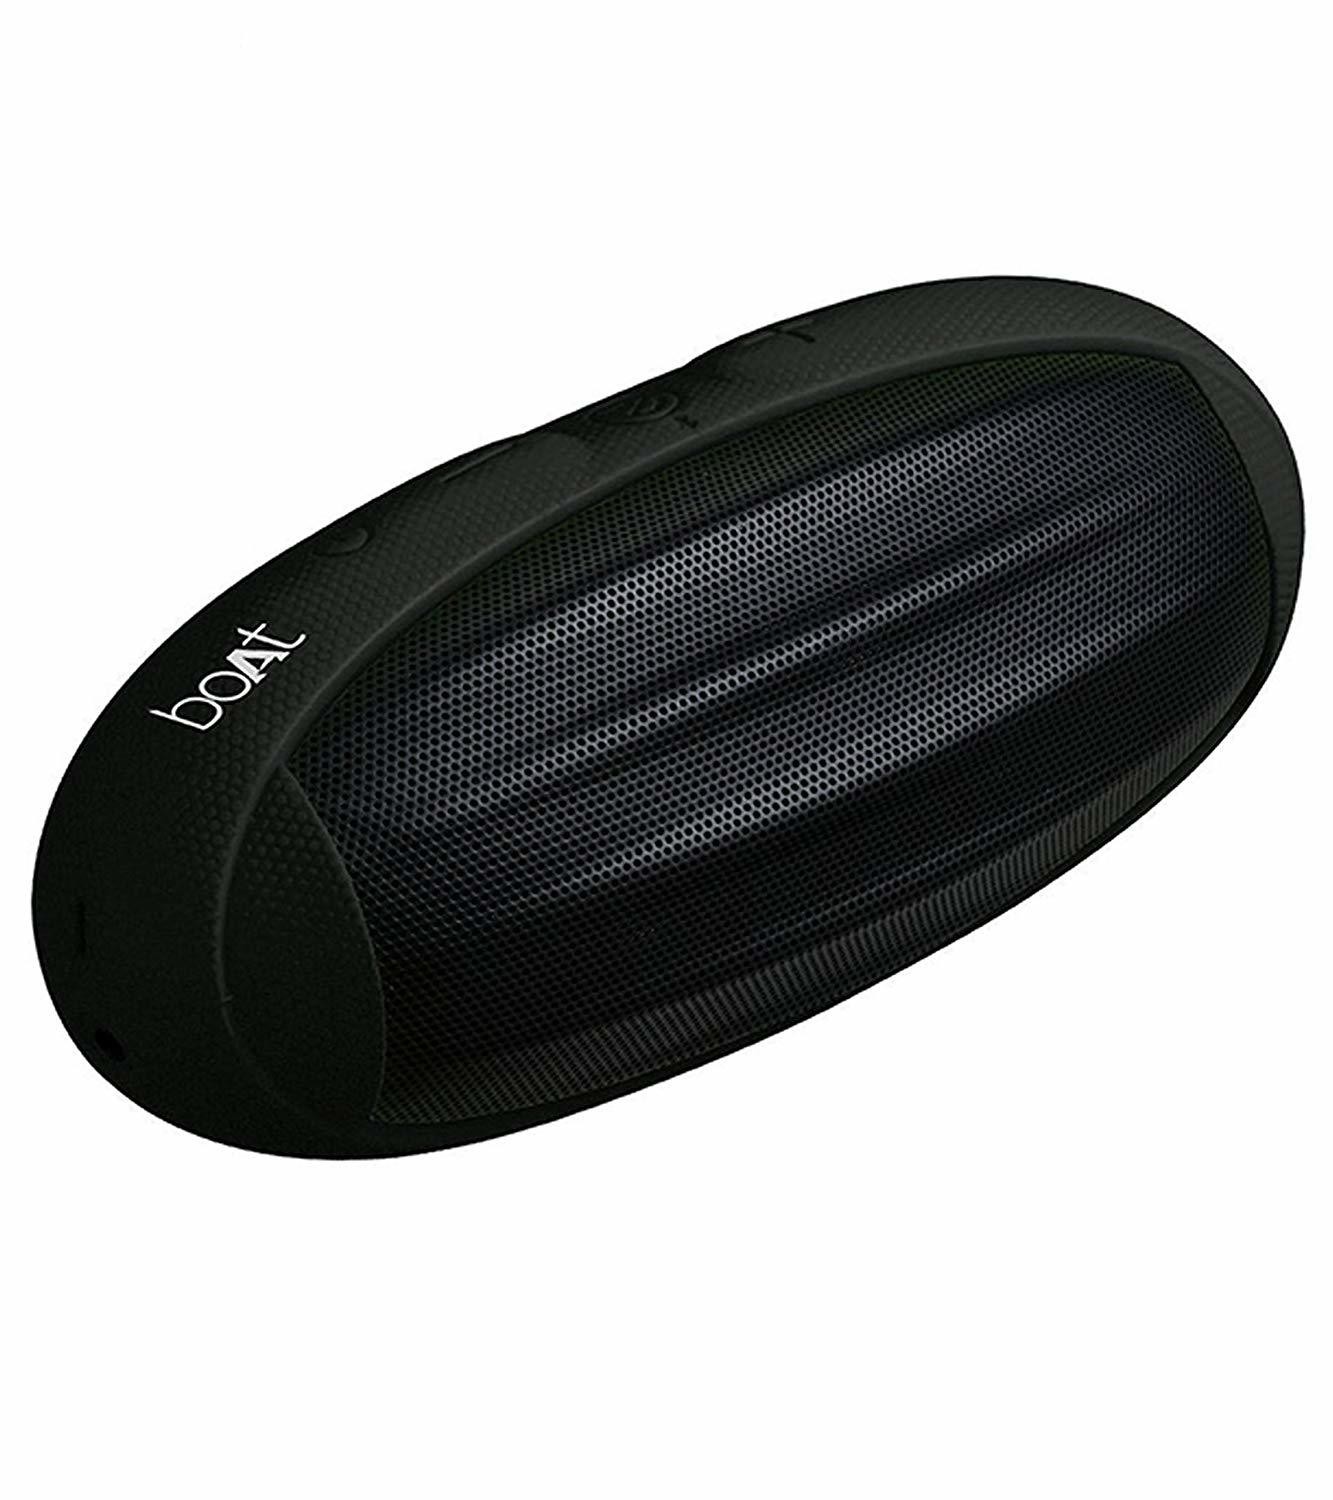 boAt Rugby Wireless Portable Stereo Speaker, Black